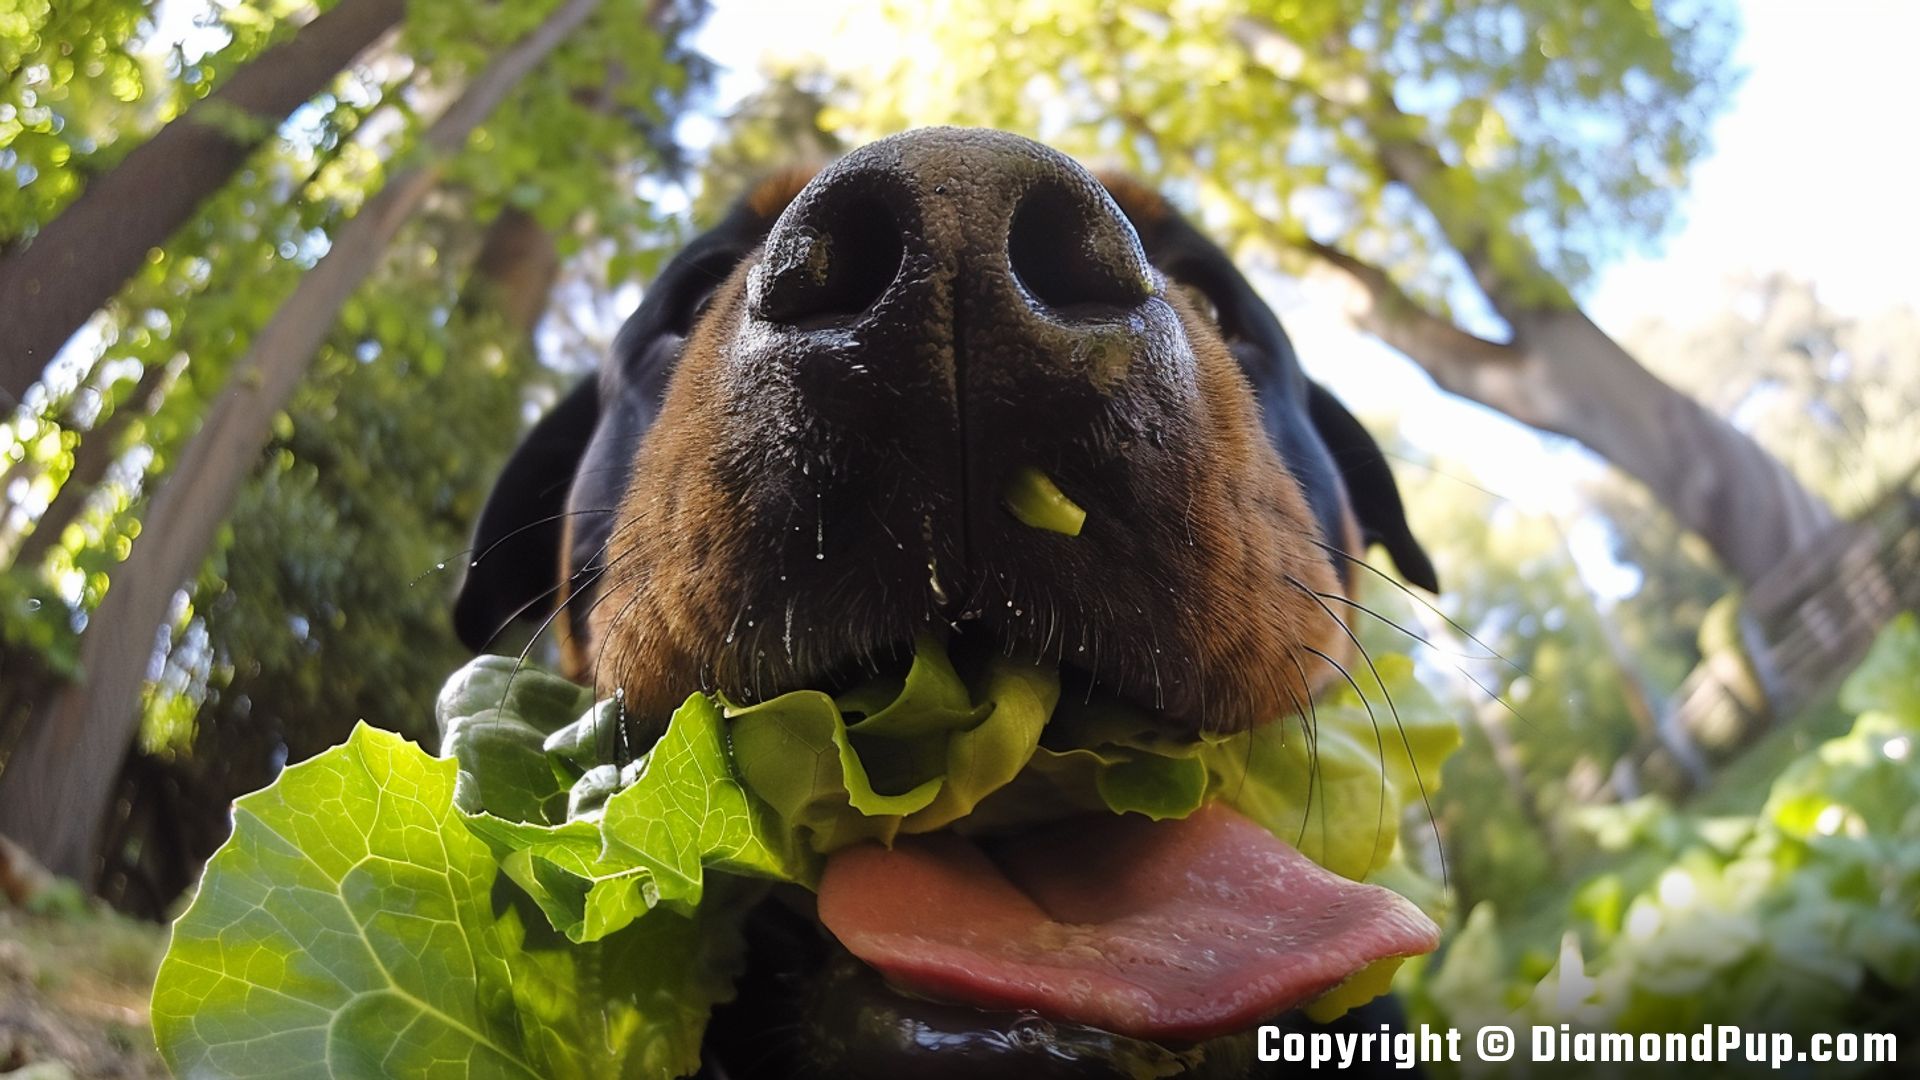 Image of an Adorable Rottweiler Snacking on Lettuce